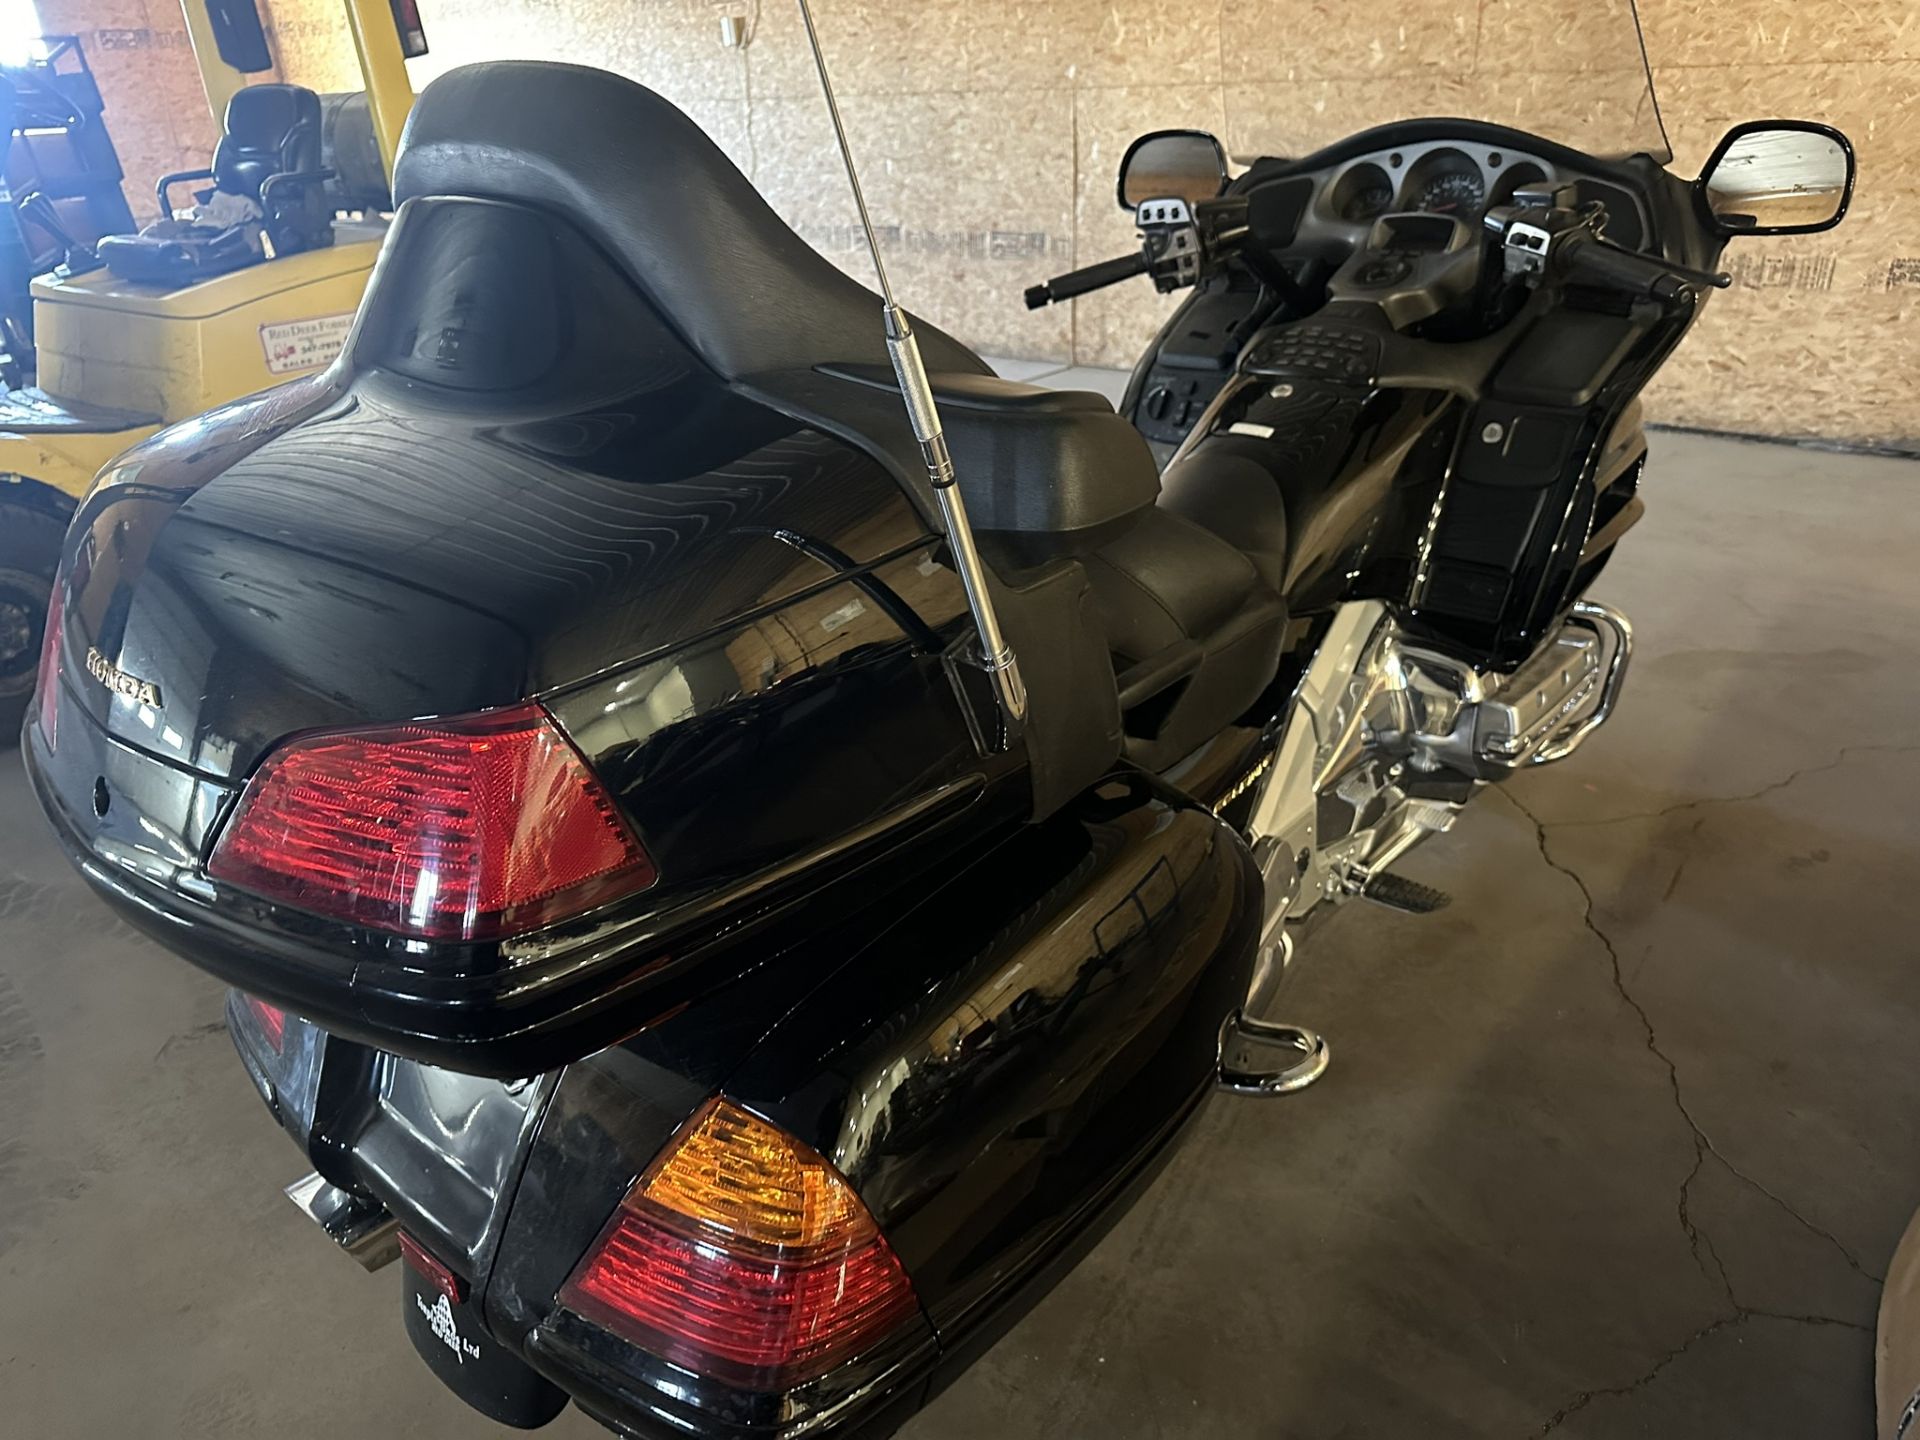 2001 HONDA GOLDWING GL1800A MOTORCYLE 1800CC, 13,352 KM SHOWING, W/ REVERSE, ADJUSTABLE SUSPENSION - Image 6 of 9